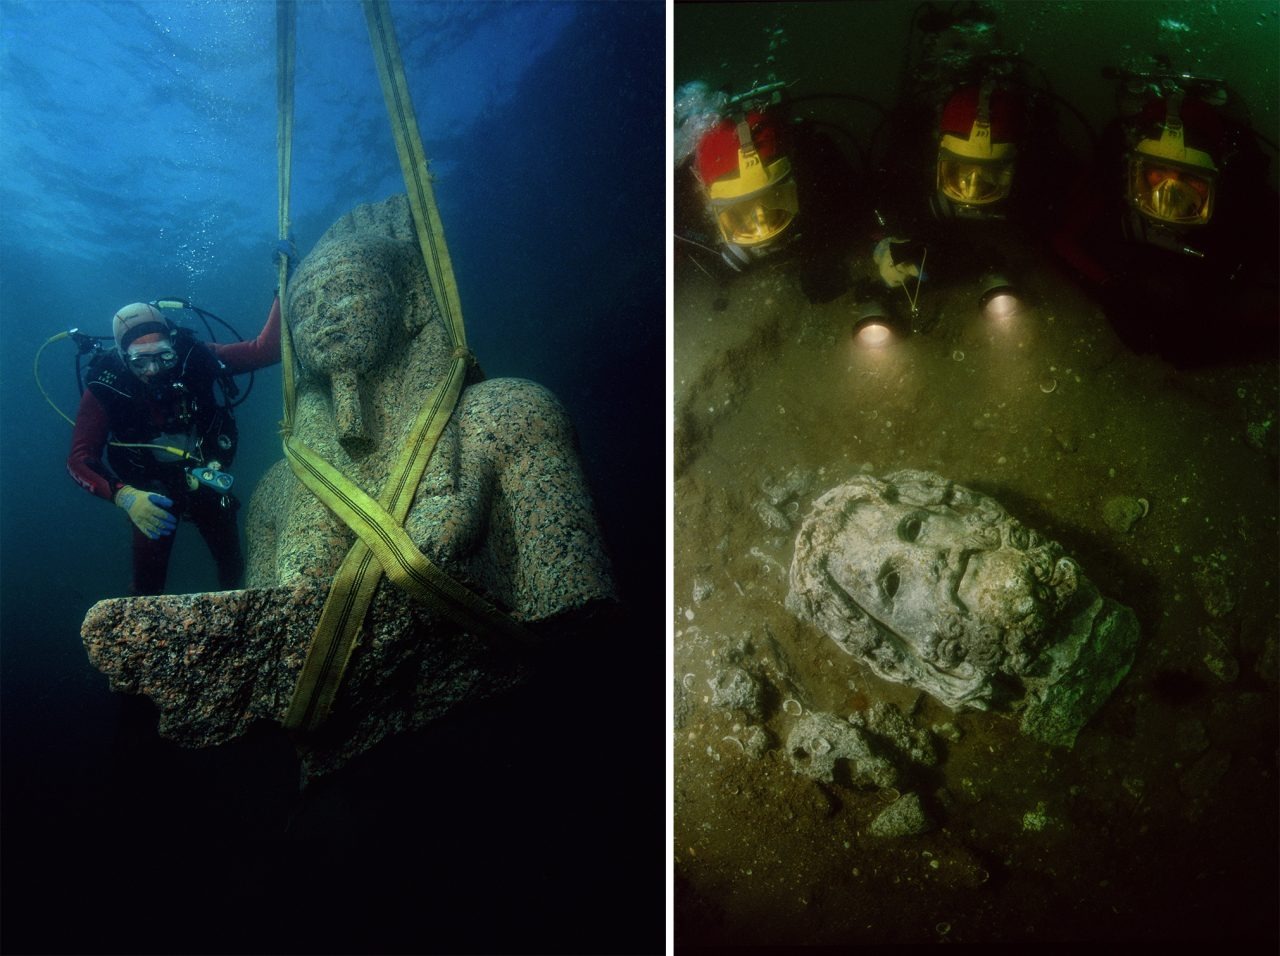 Lost Egyptian city Thonis Heracleion resurfaces after 1000-year submersion